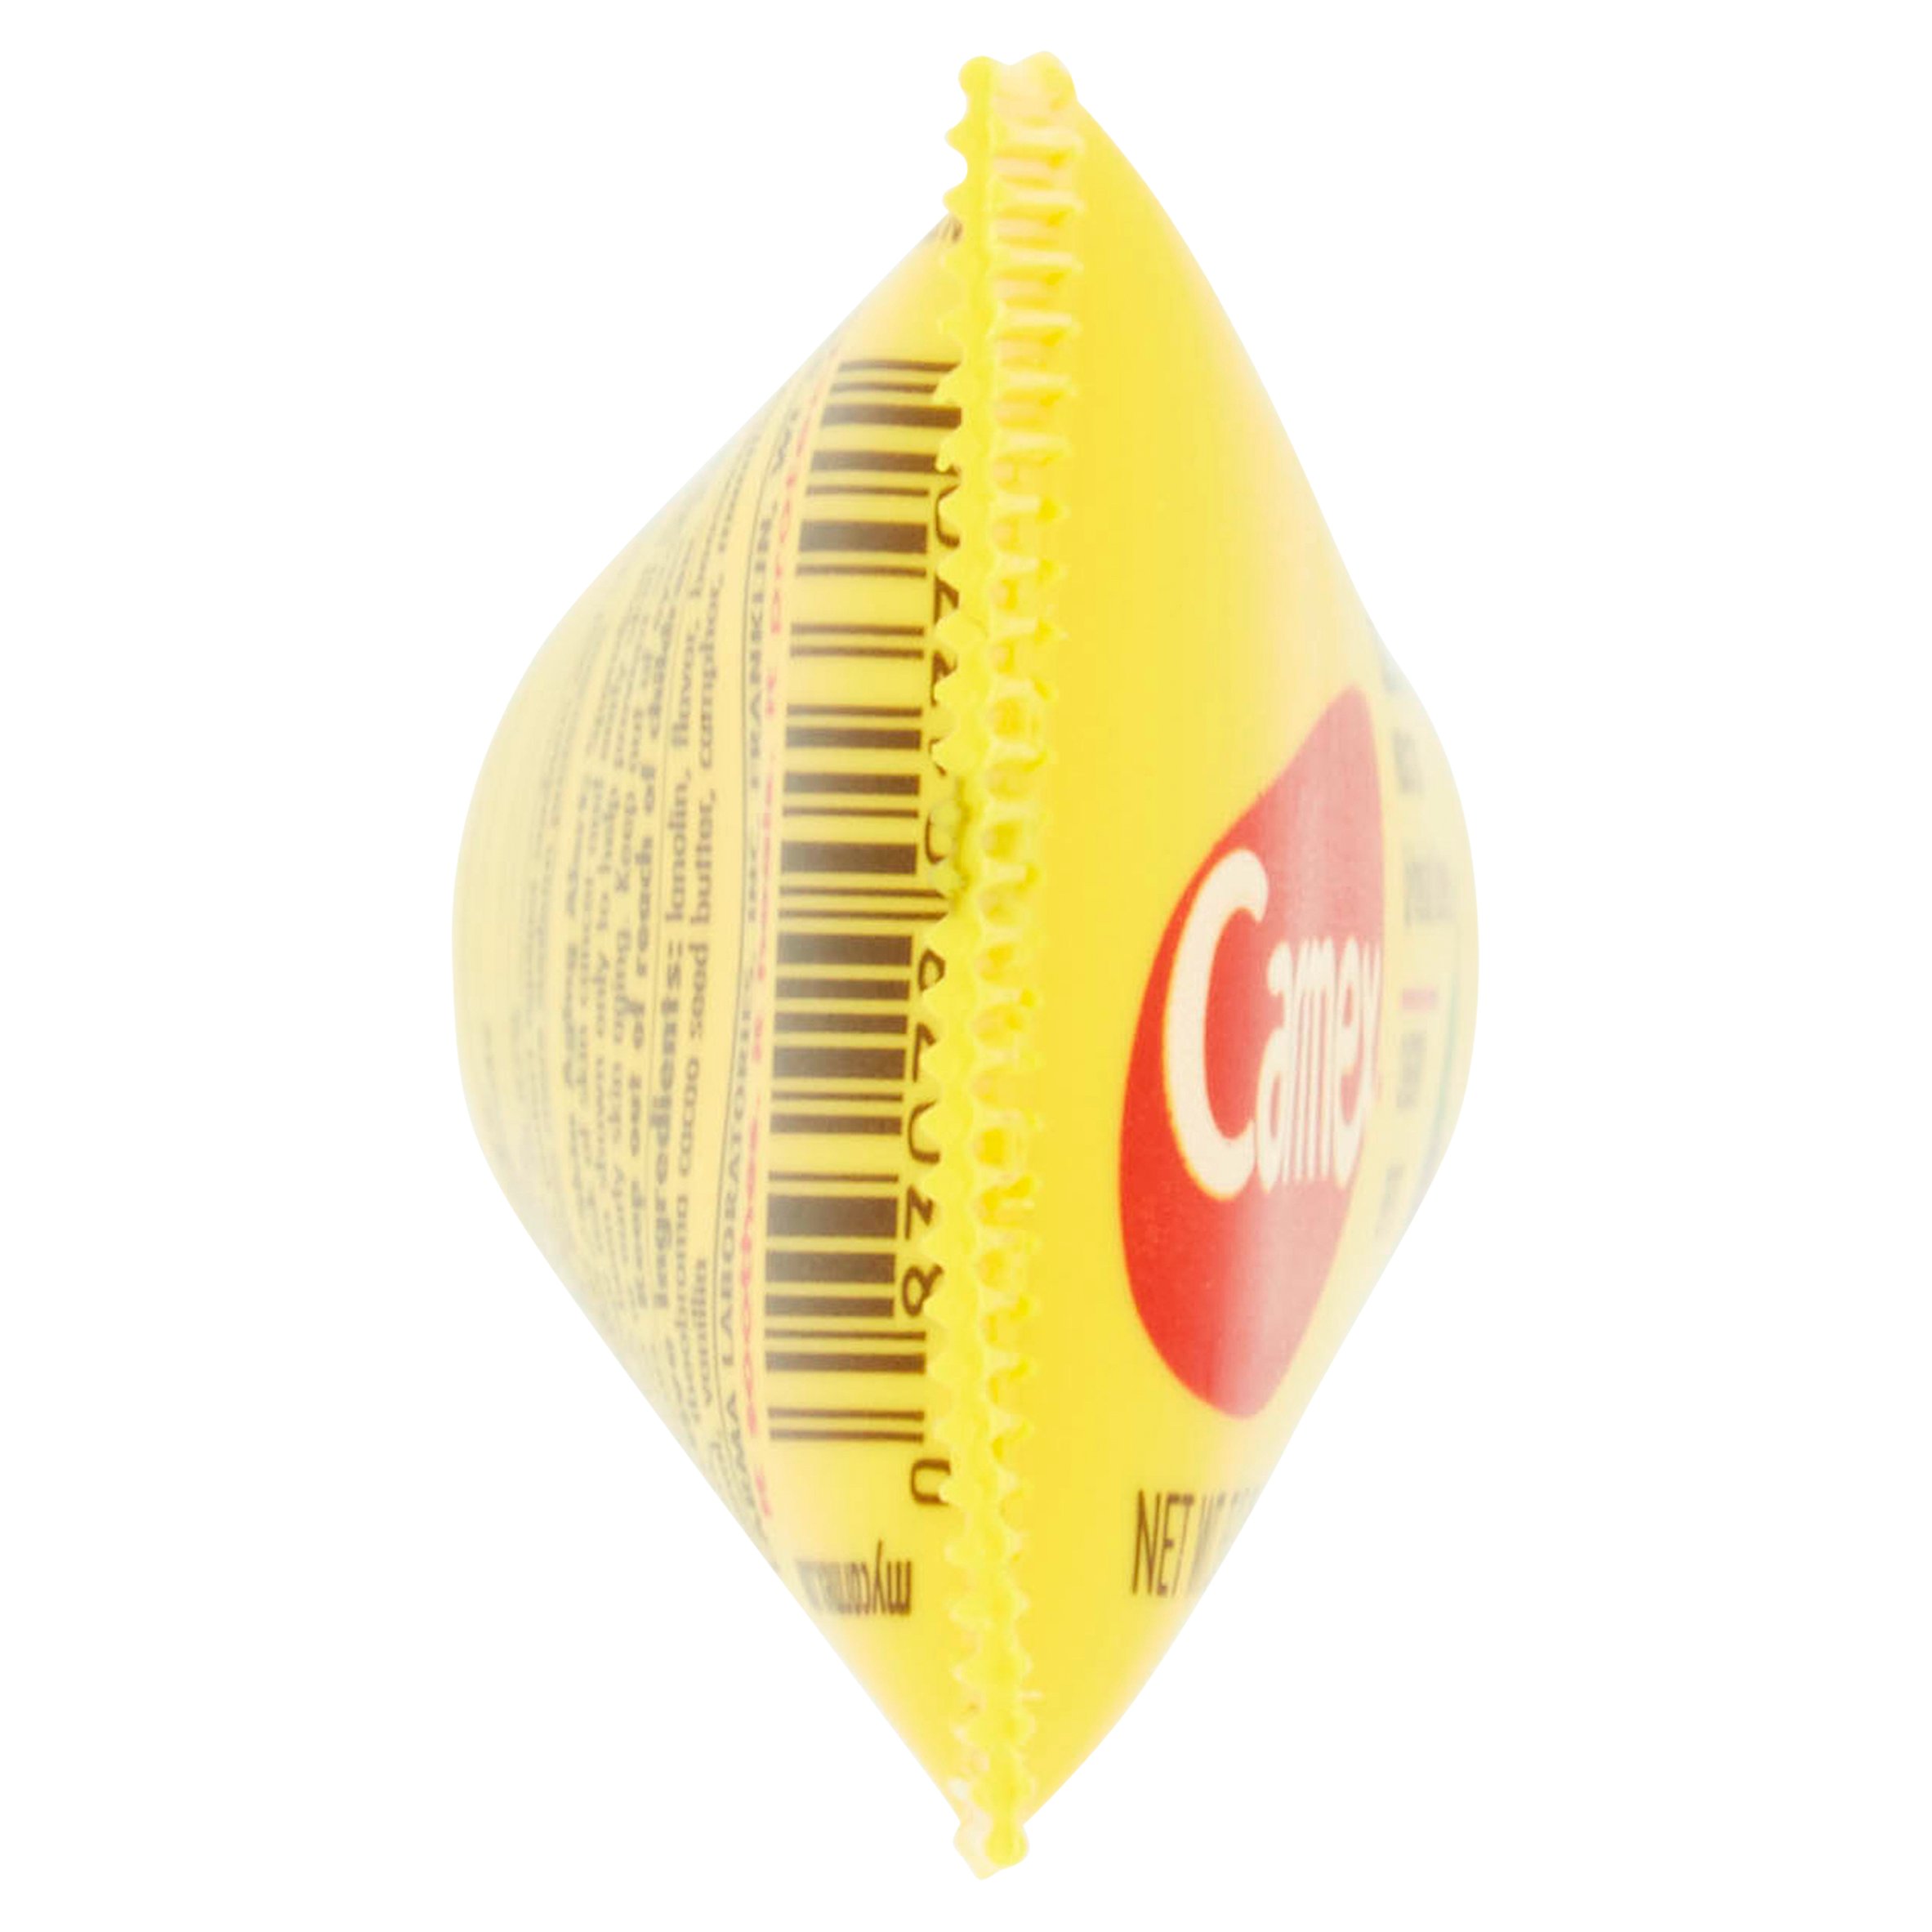 Carmex Cherry Flavor Tube .35 oz (Pack of 12) - image 3 of 6